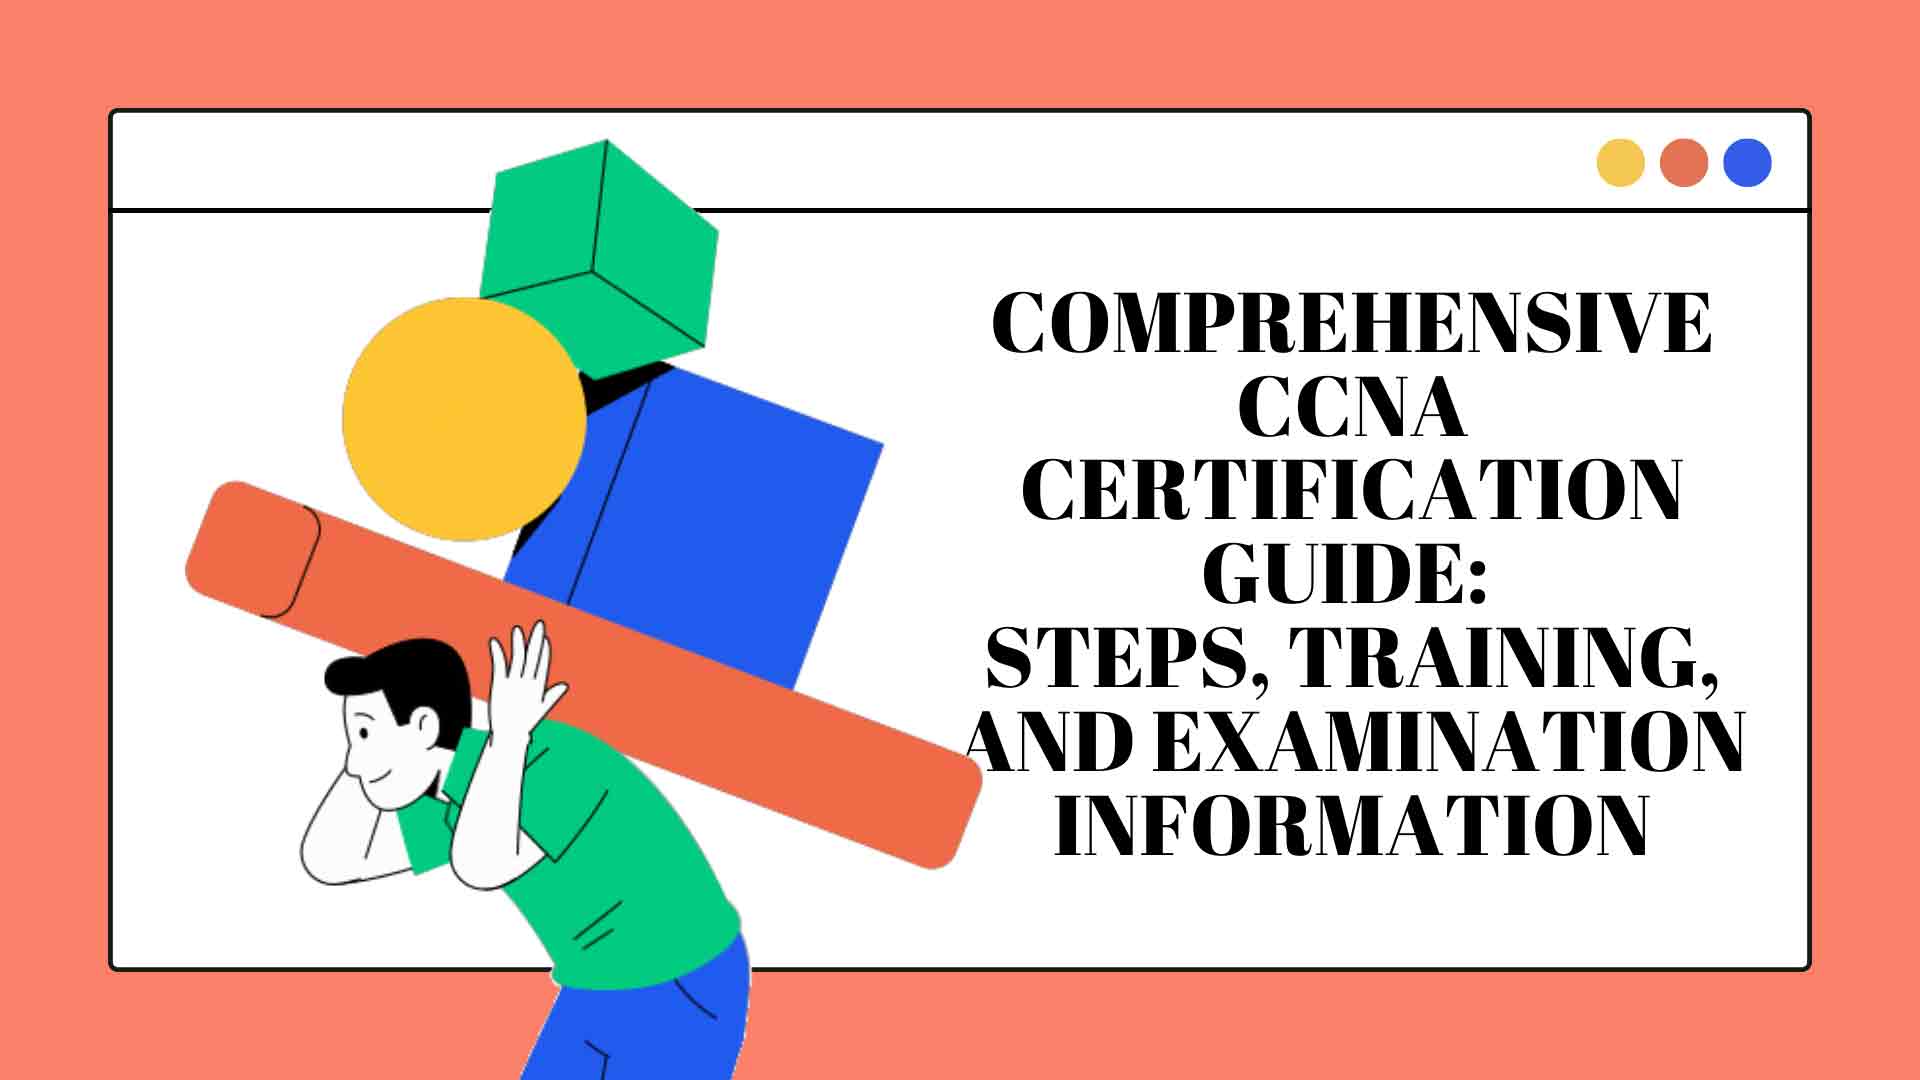 Comprehensive CCNA Certification Guide: Steps, Training, and Examination Information